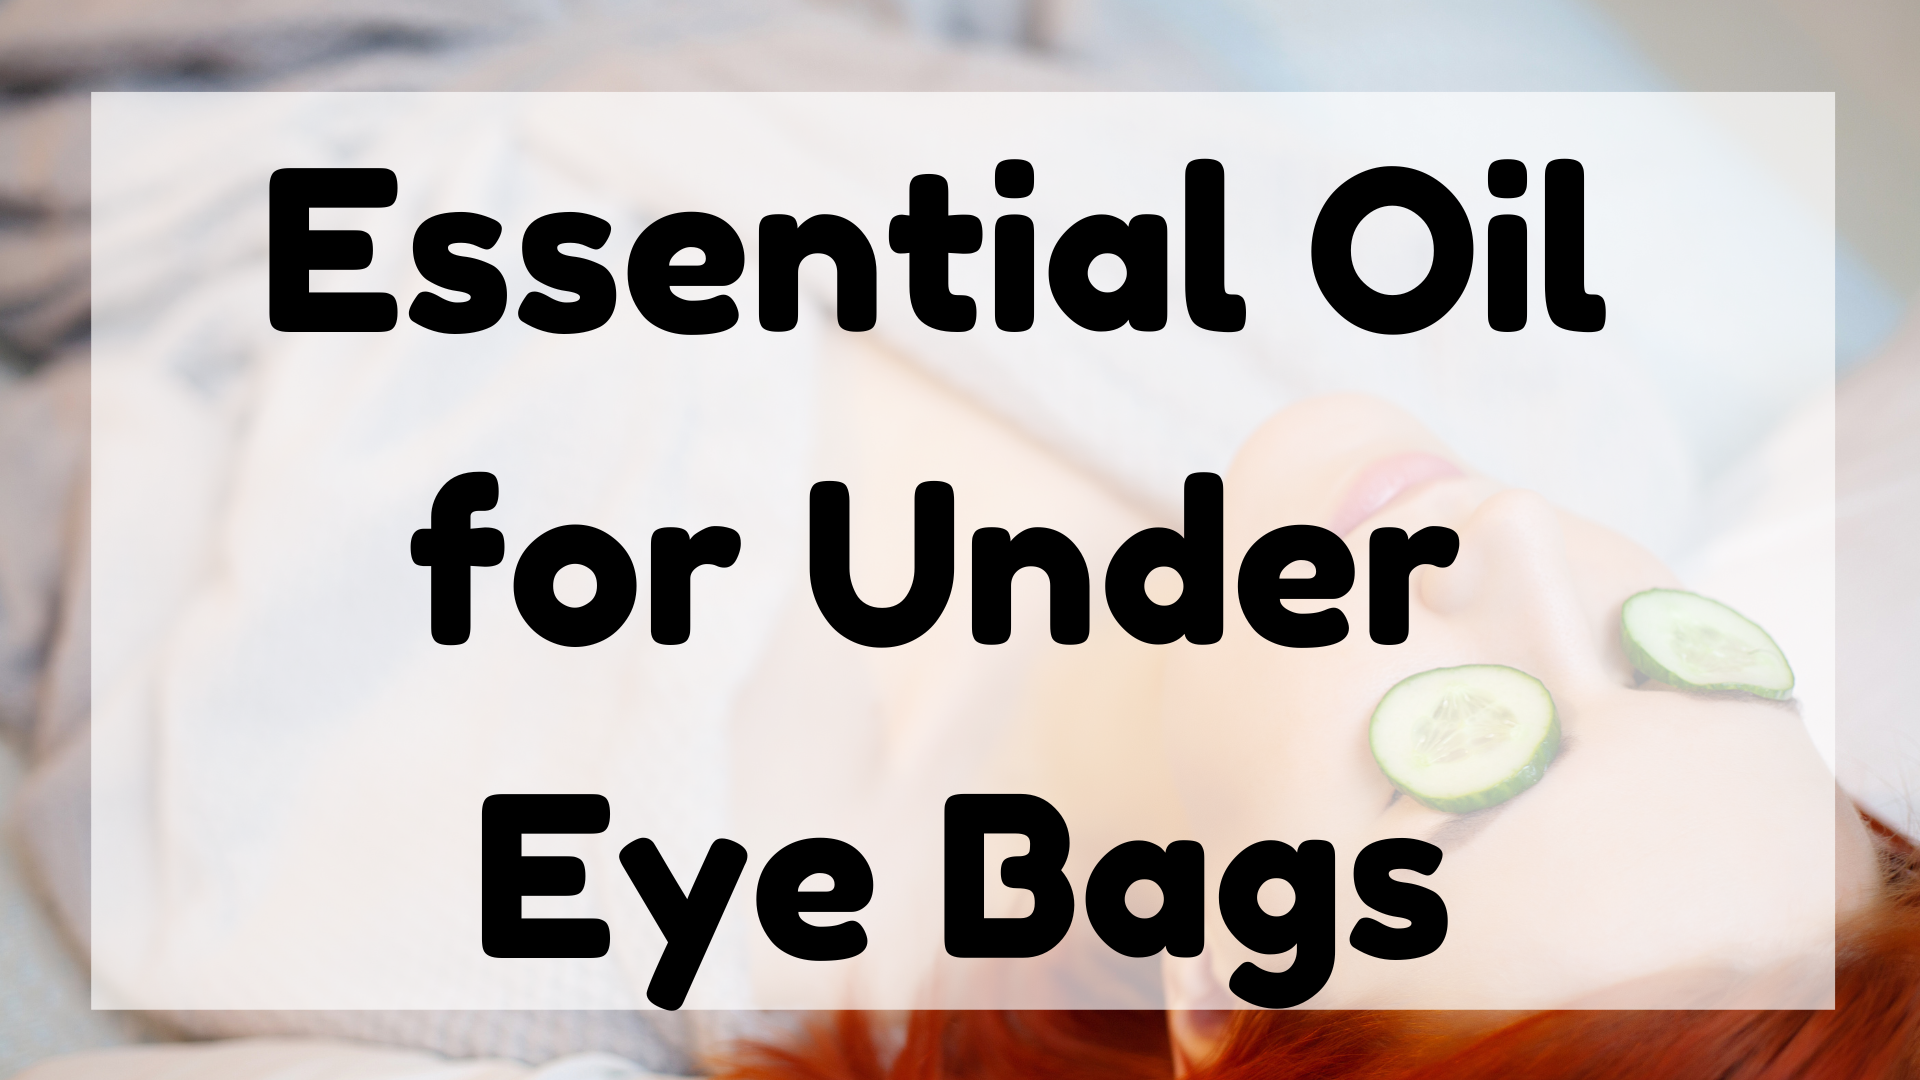 Essential Oil for Under Eye Bags featured image